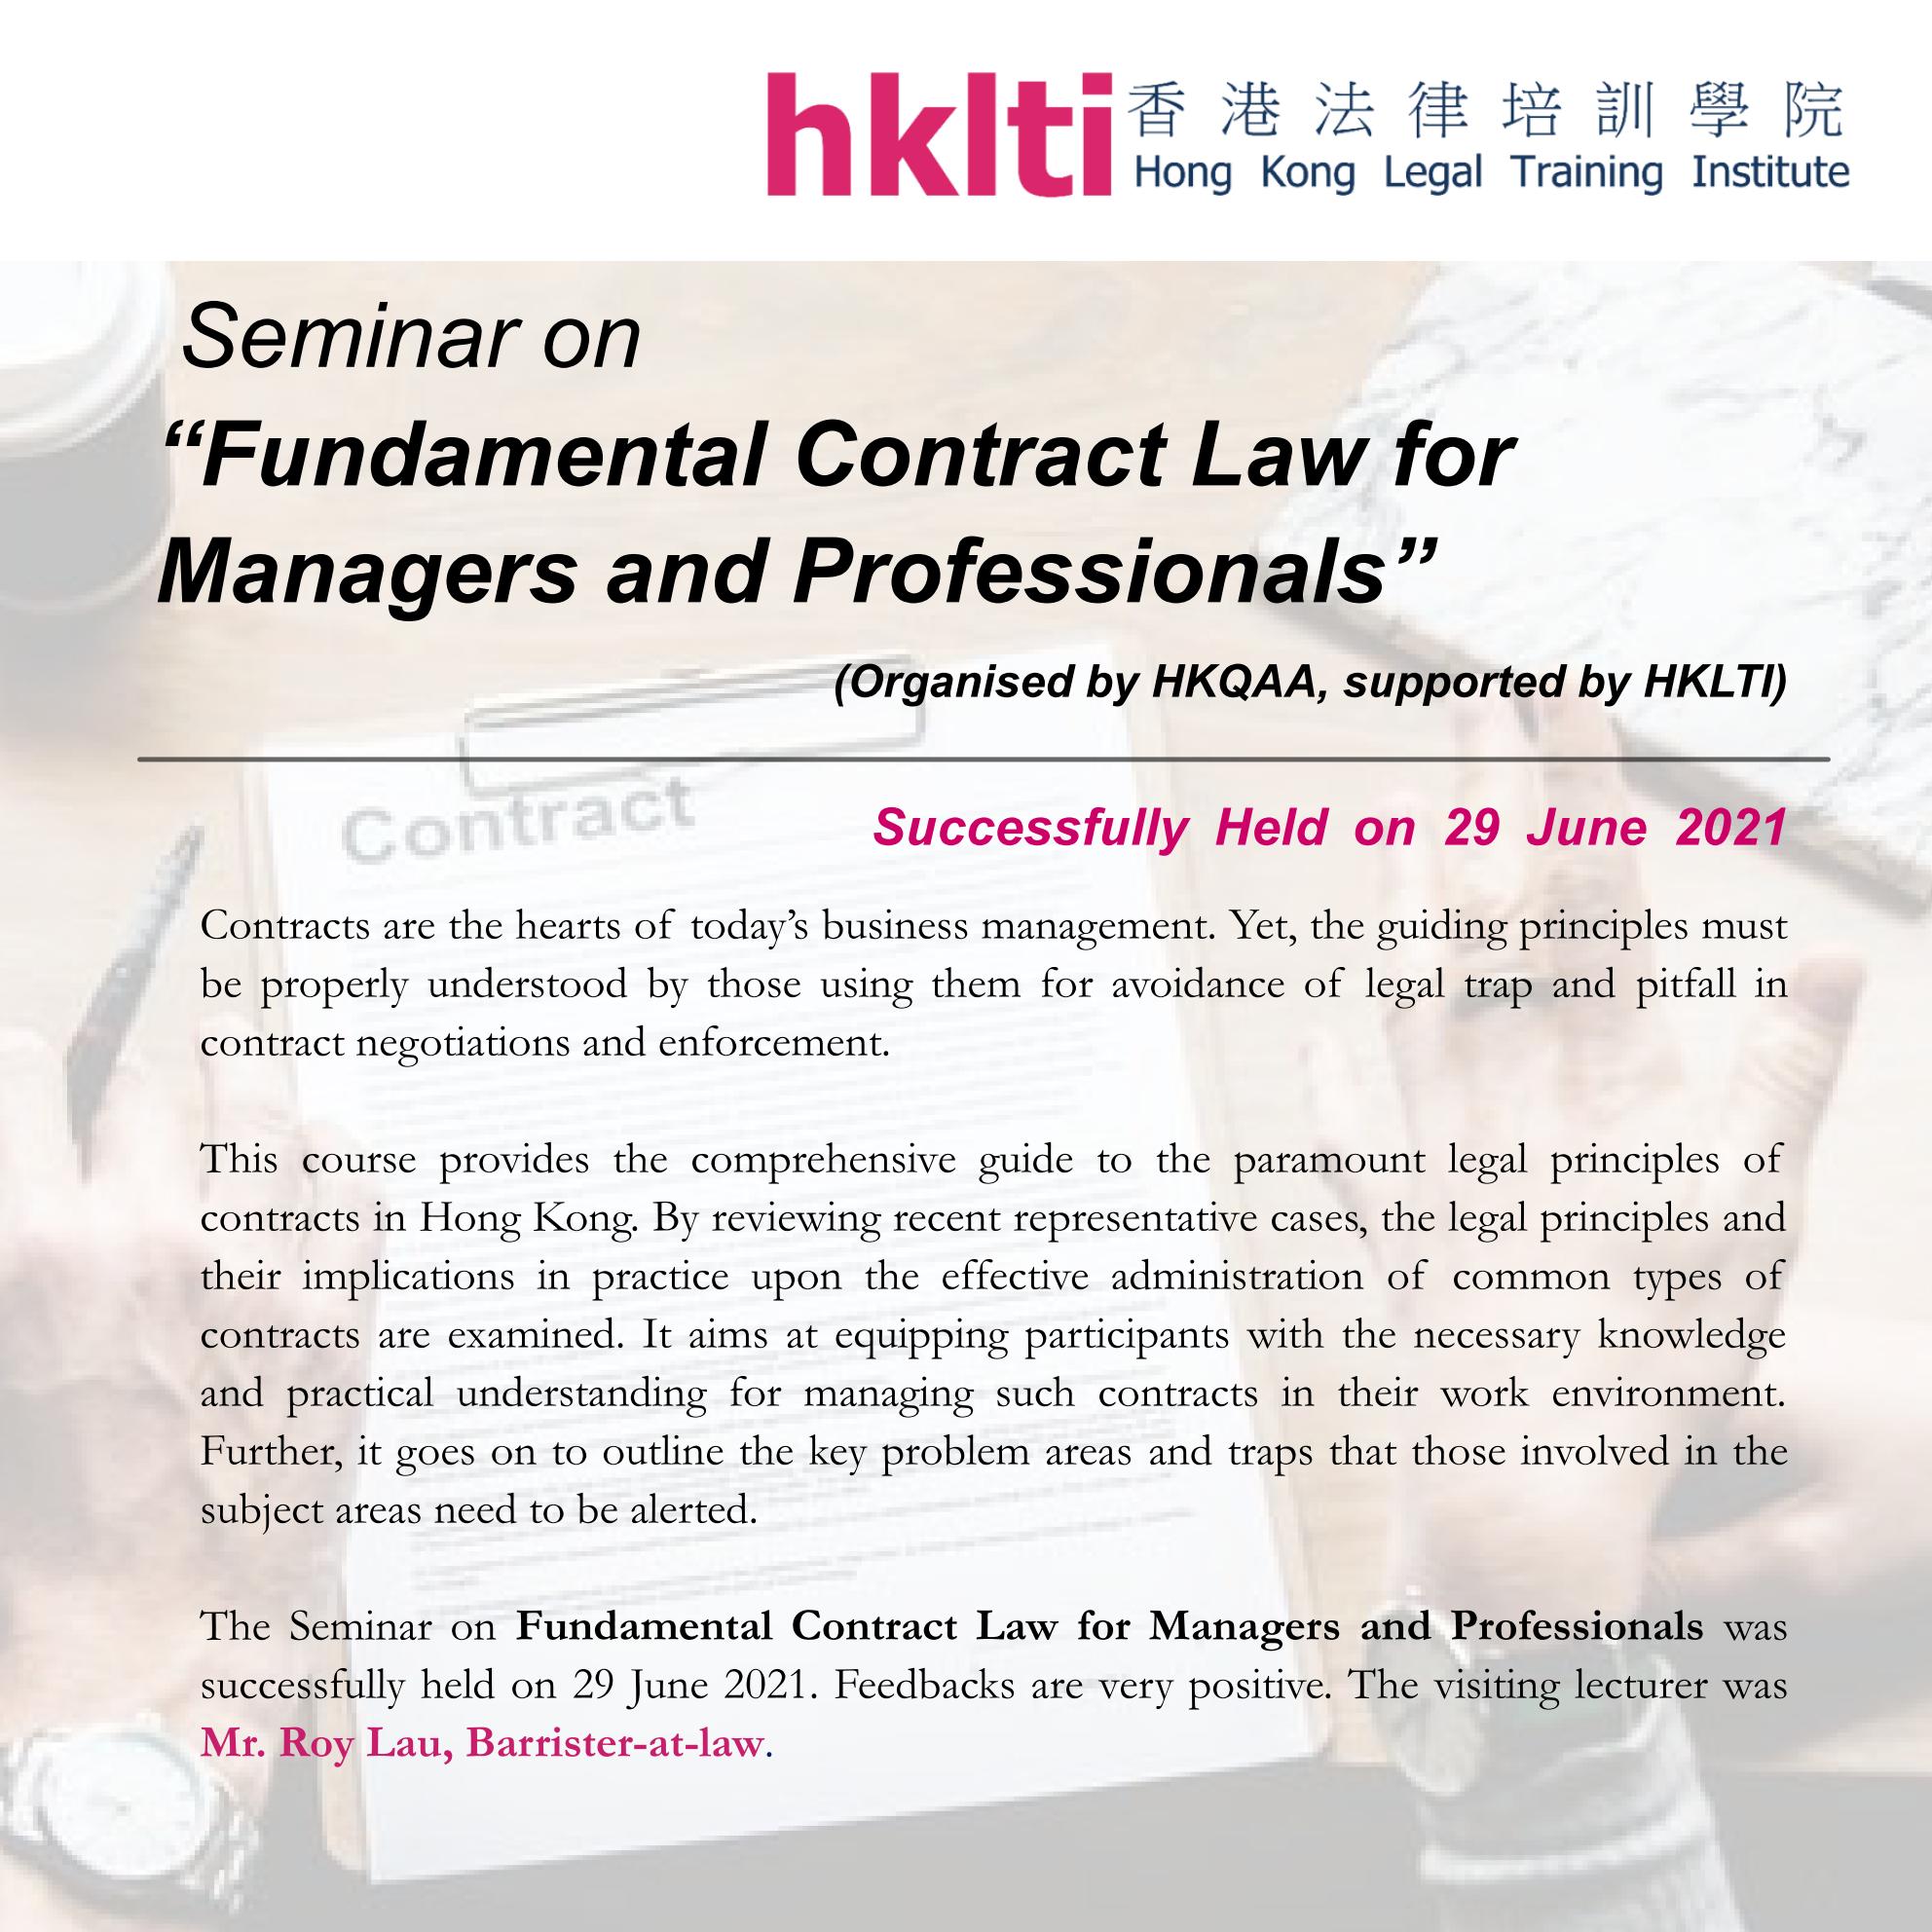 hklti hkqaa fundamental contract law for mangers and professionals seminar report 20210629